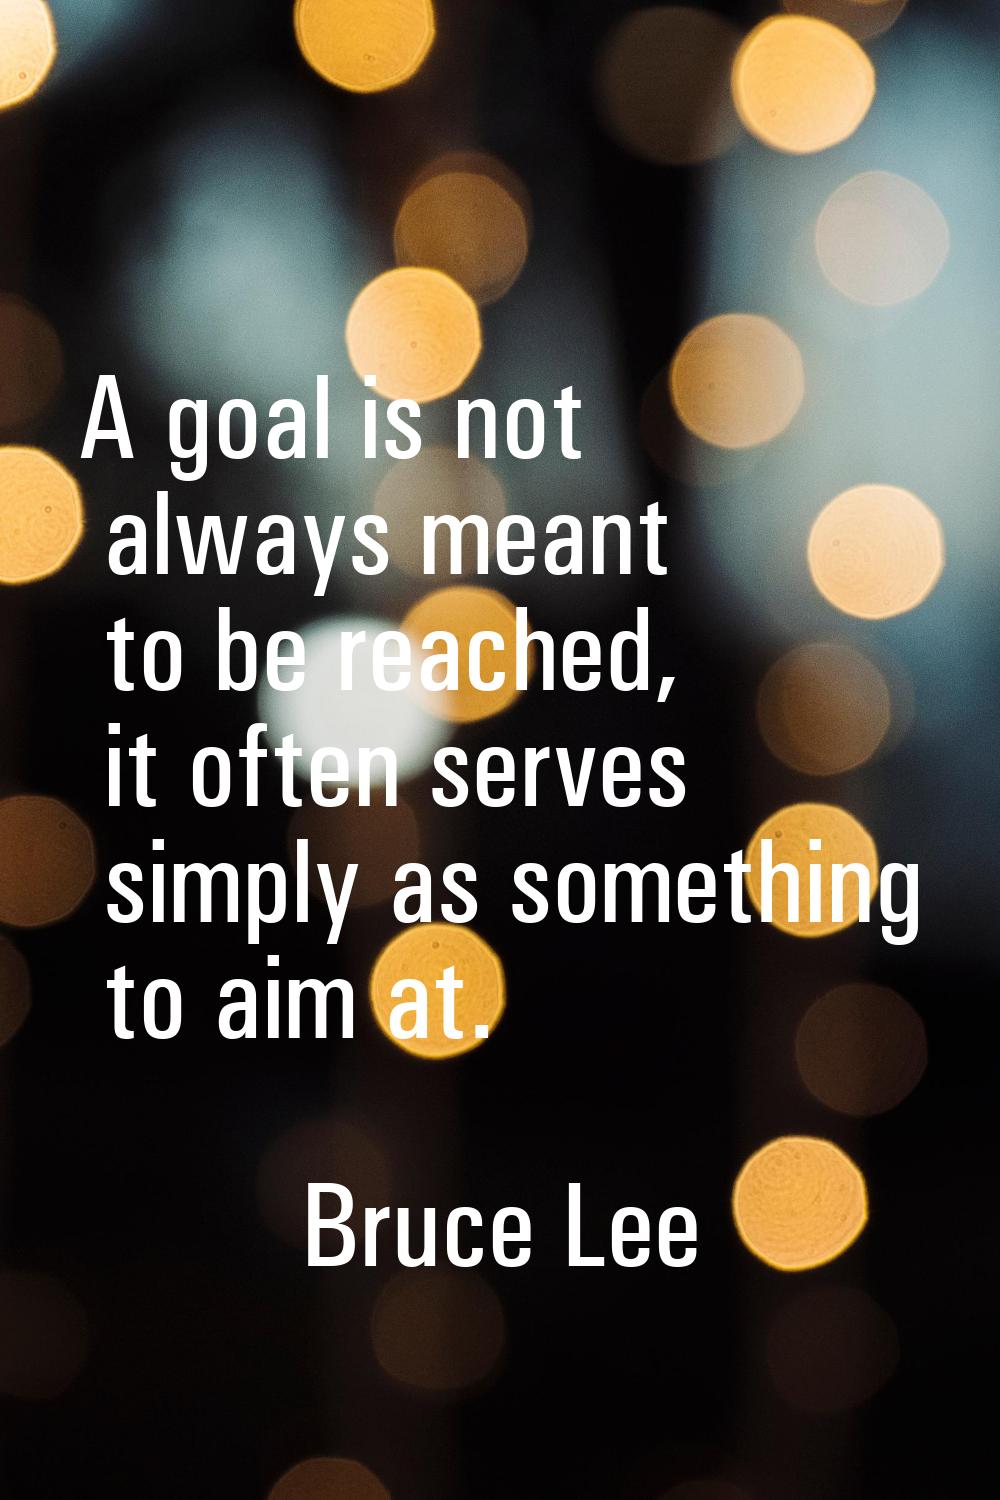 A goal is not always meant to be reached, it often serves simply as something to aim at.